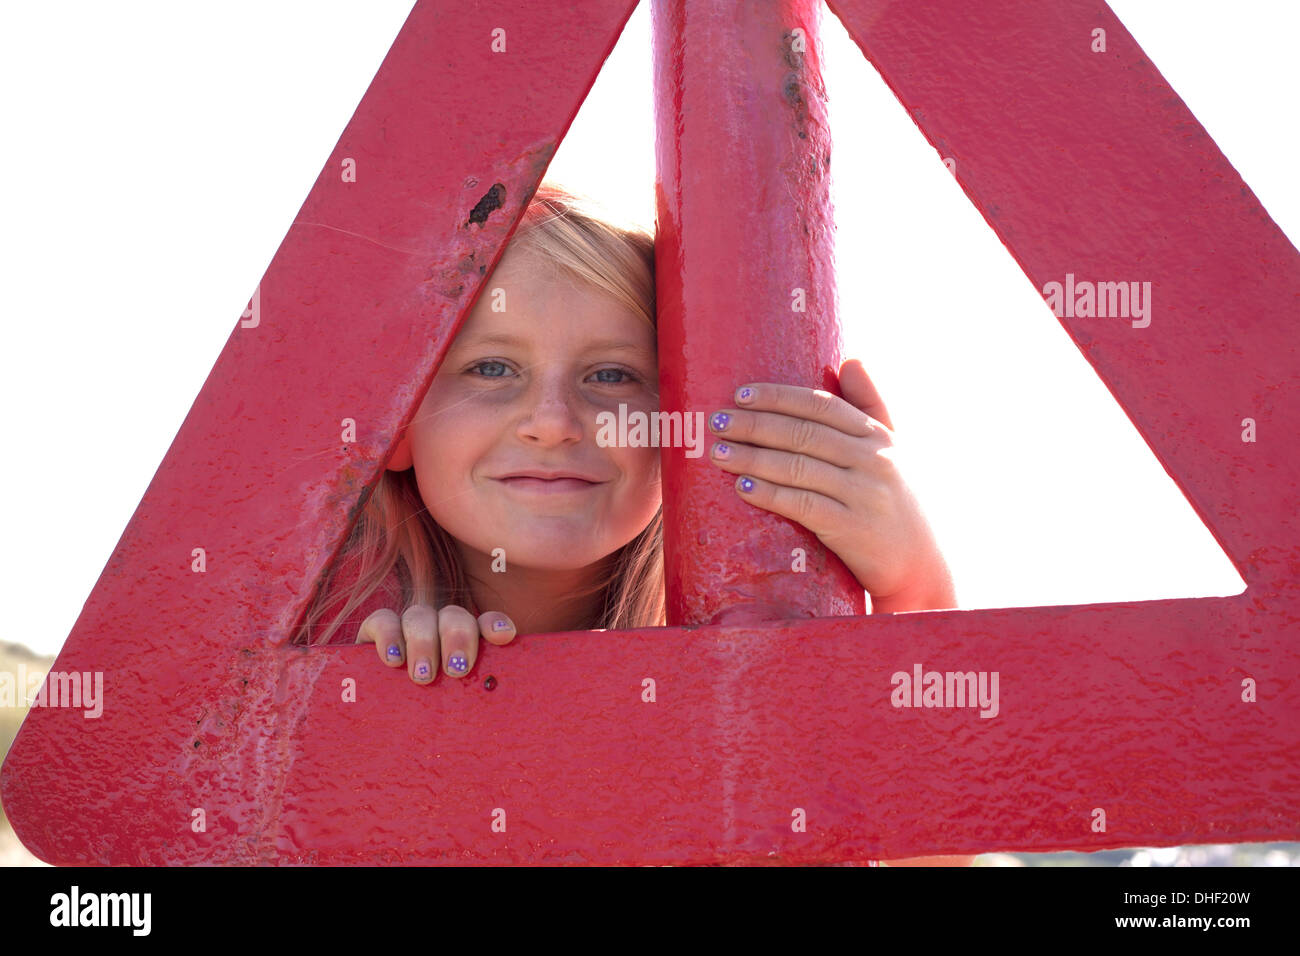 Portrait of girl looking through red triangle, Wales, UK Stock Photo